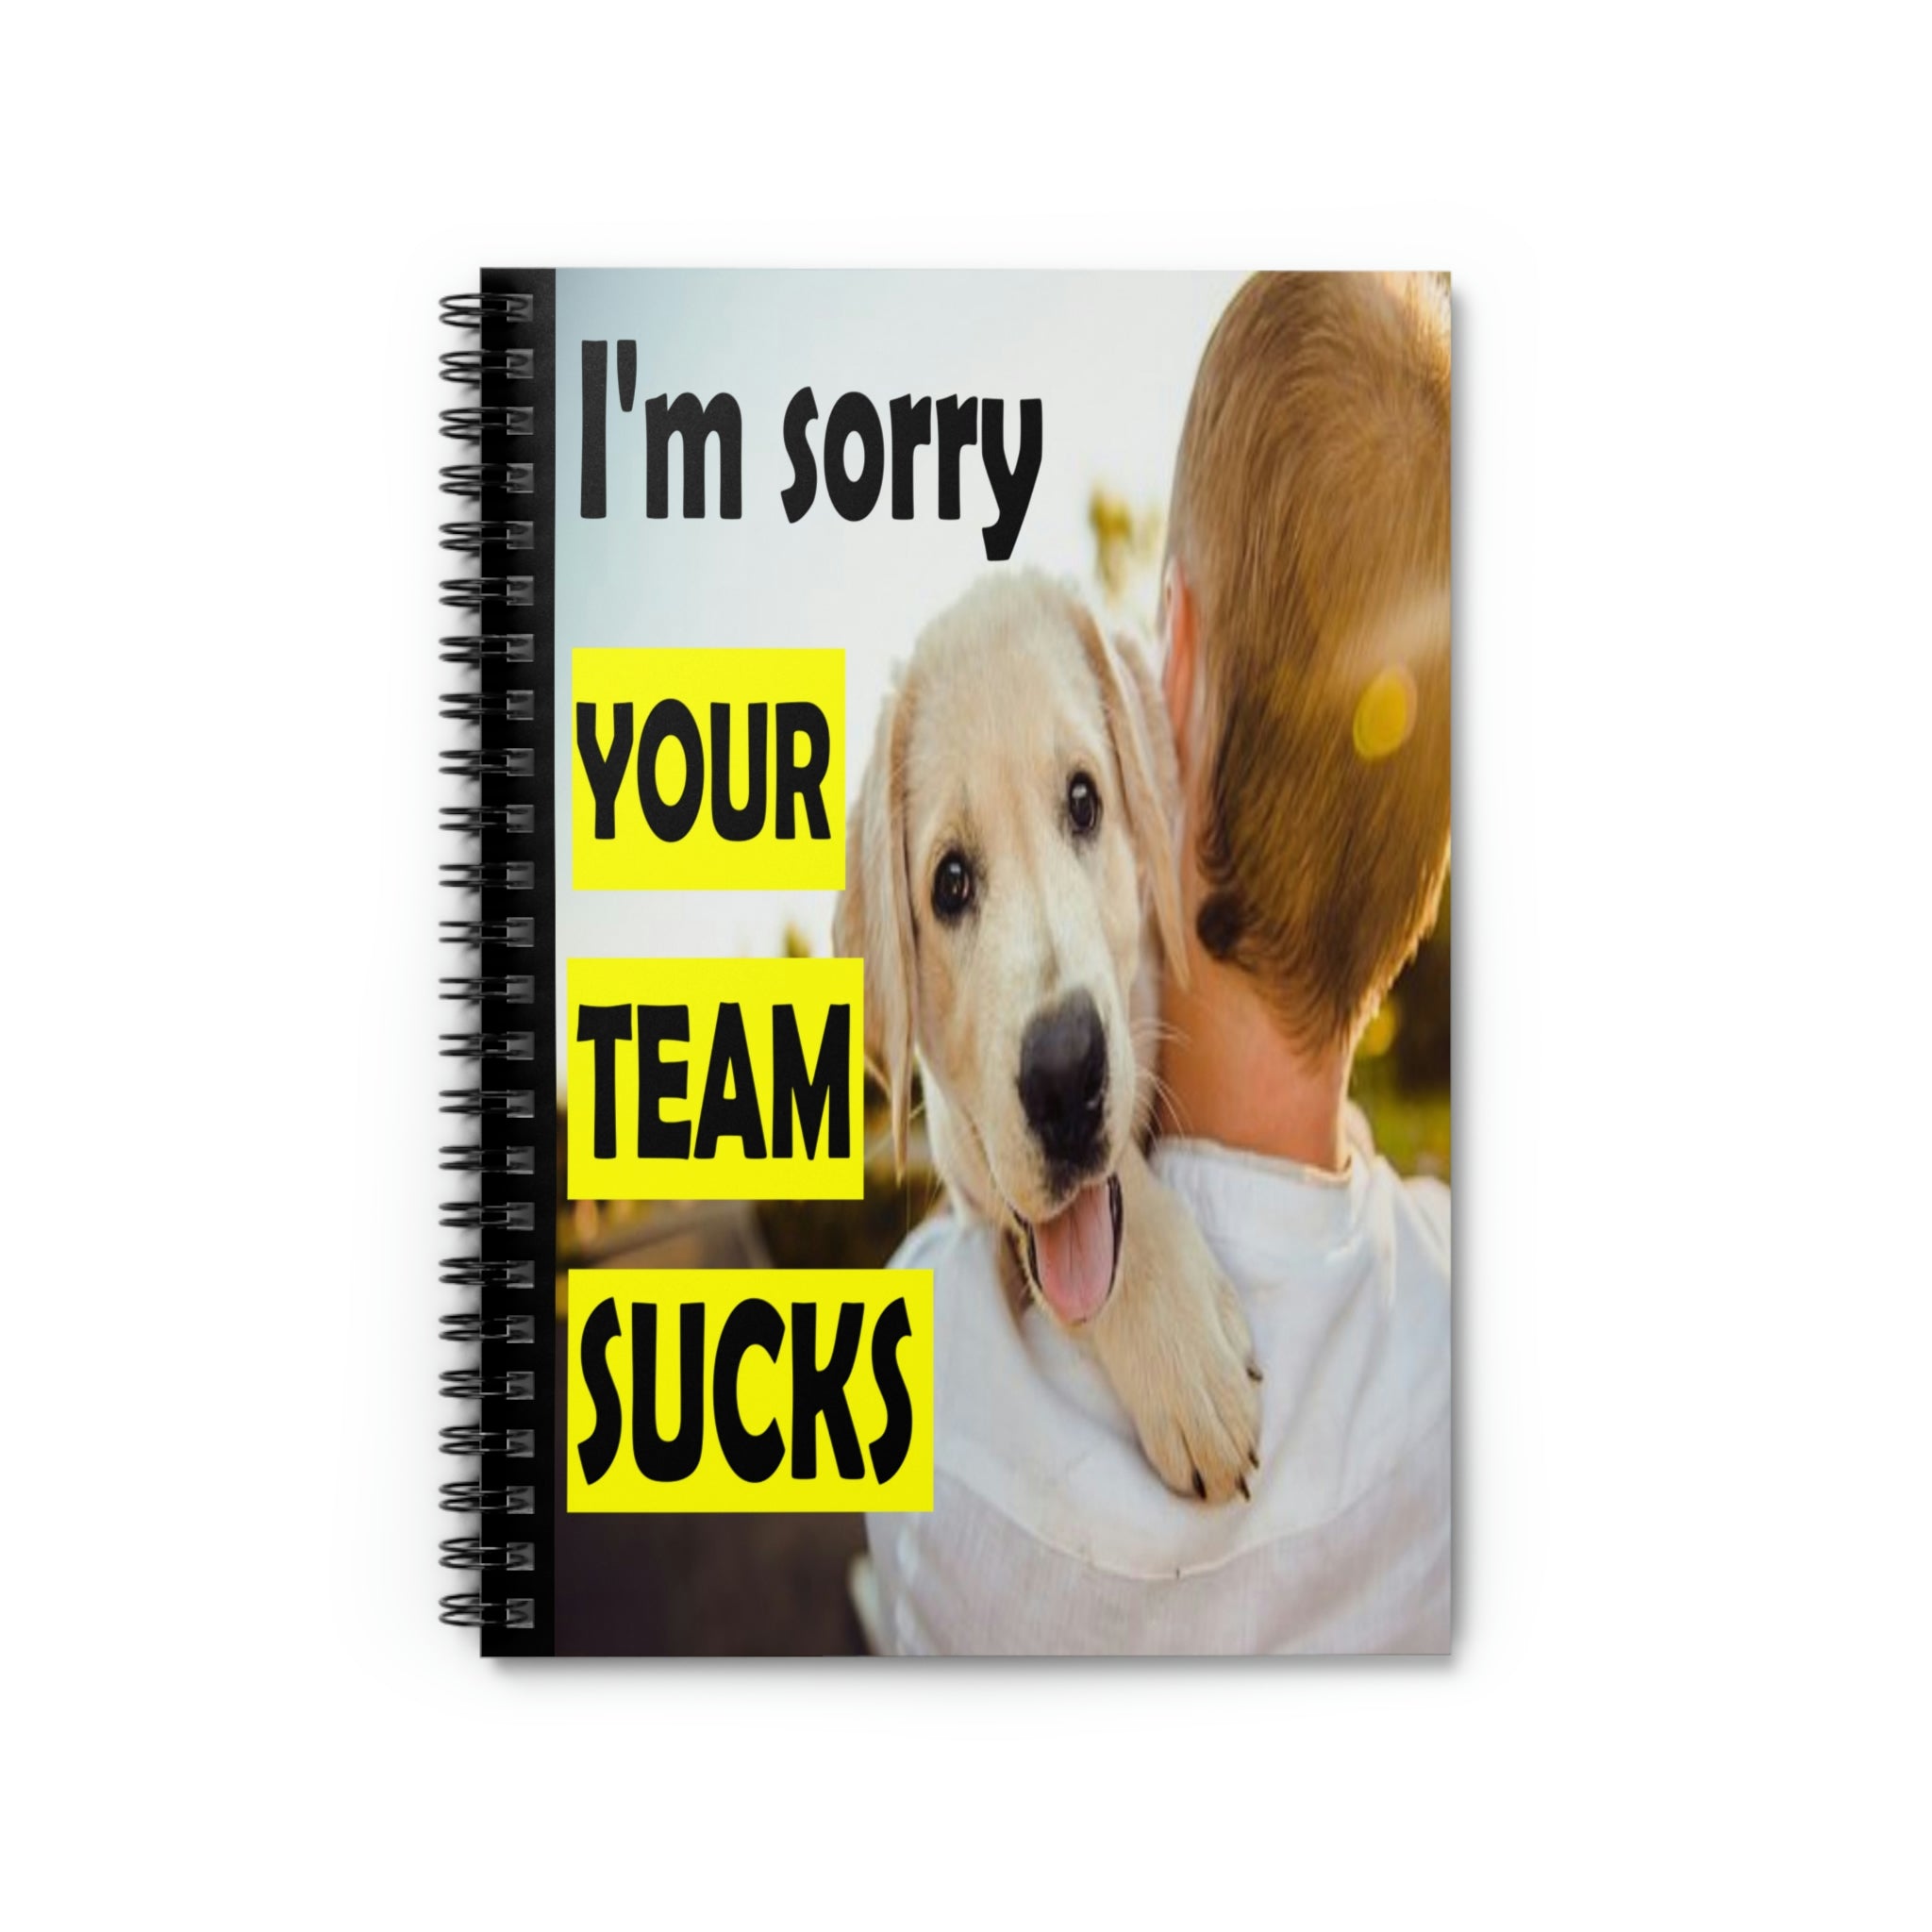 Spiral lined notebook showing a puppy looking over the back of a man's shoulder with the caption 'I'm sorry your team sucks'.